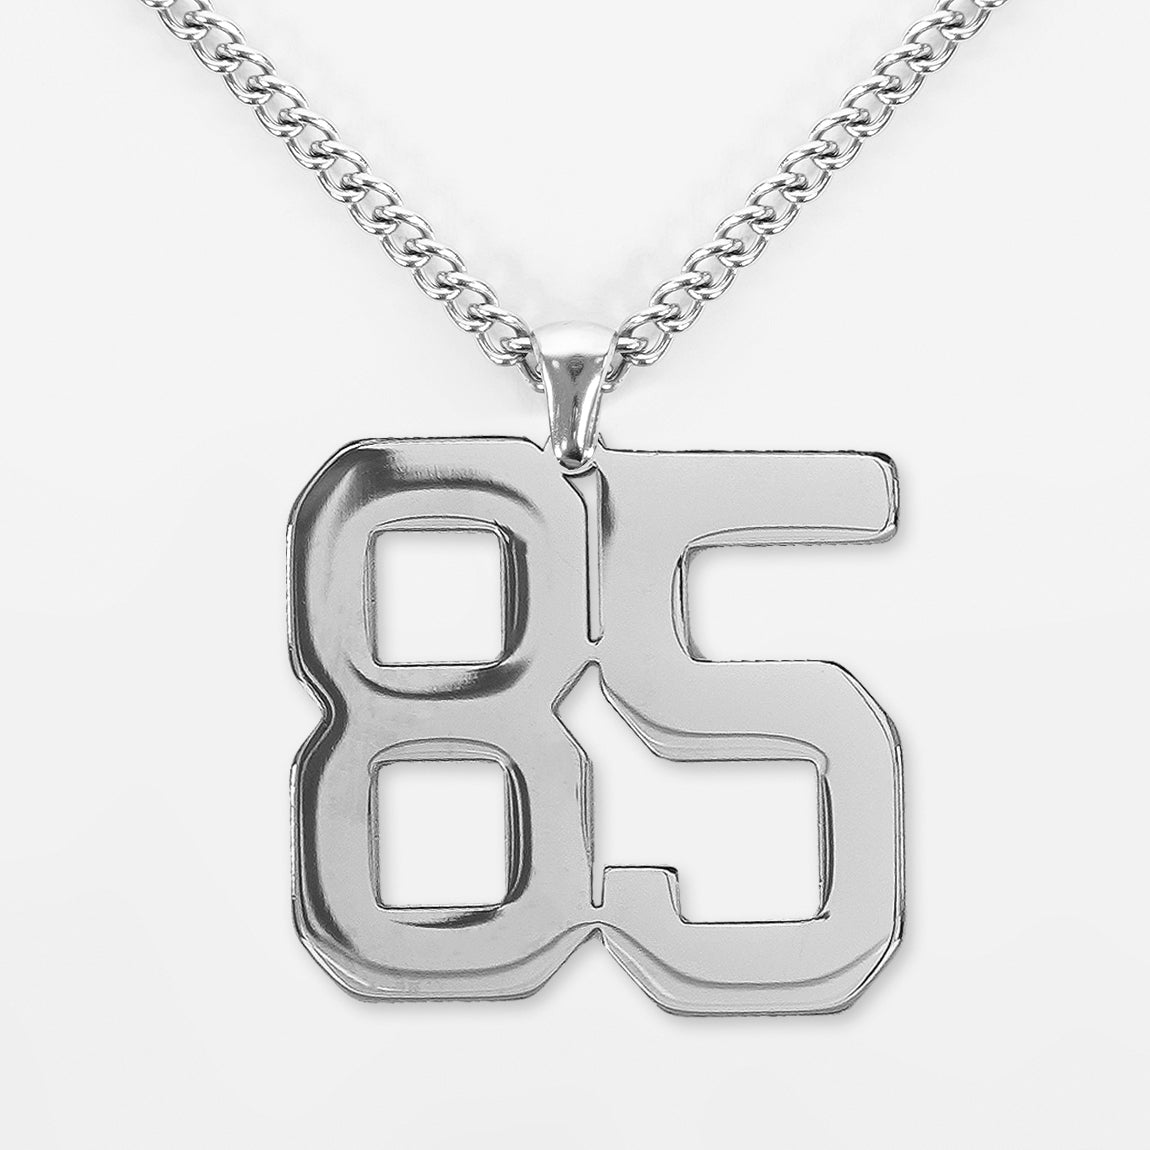 85 Number Pendant with Chain Necklace - Stainless Steel